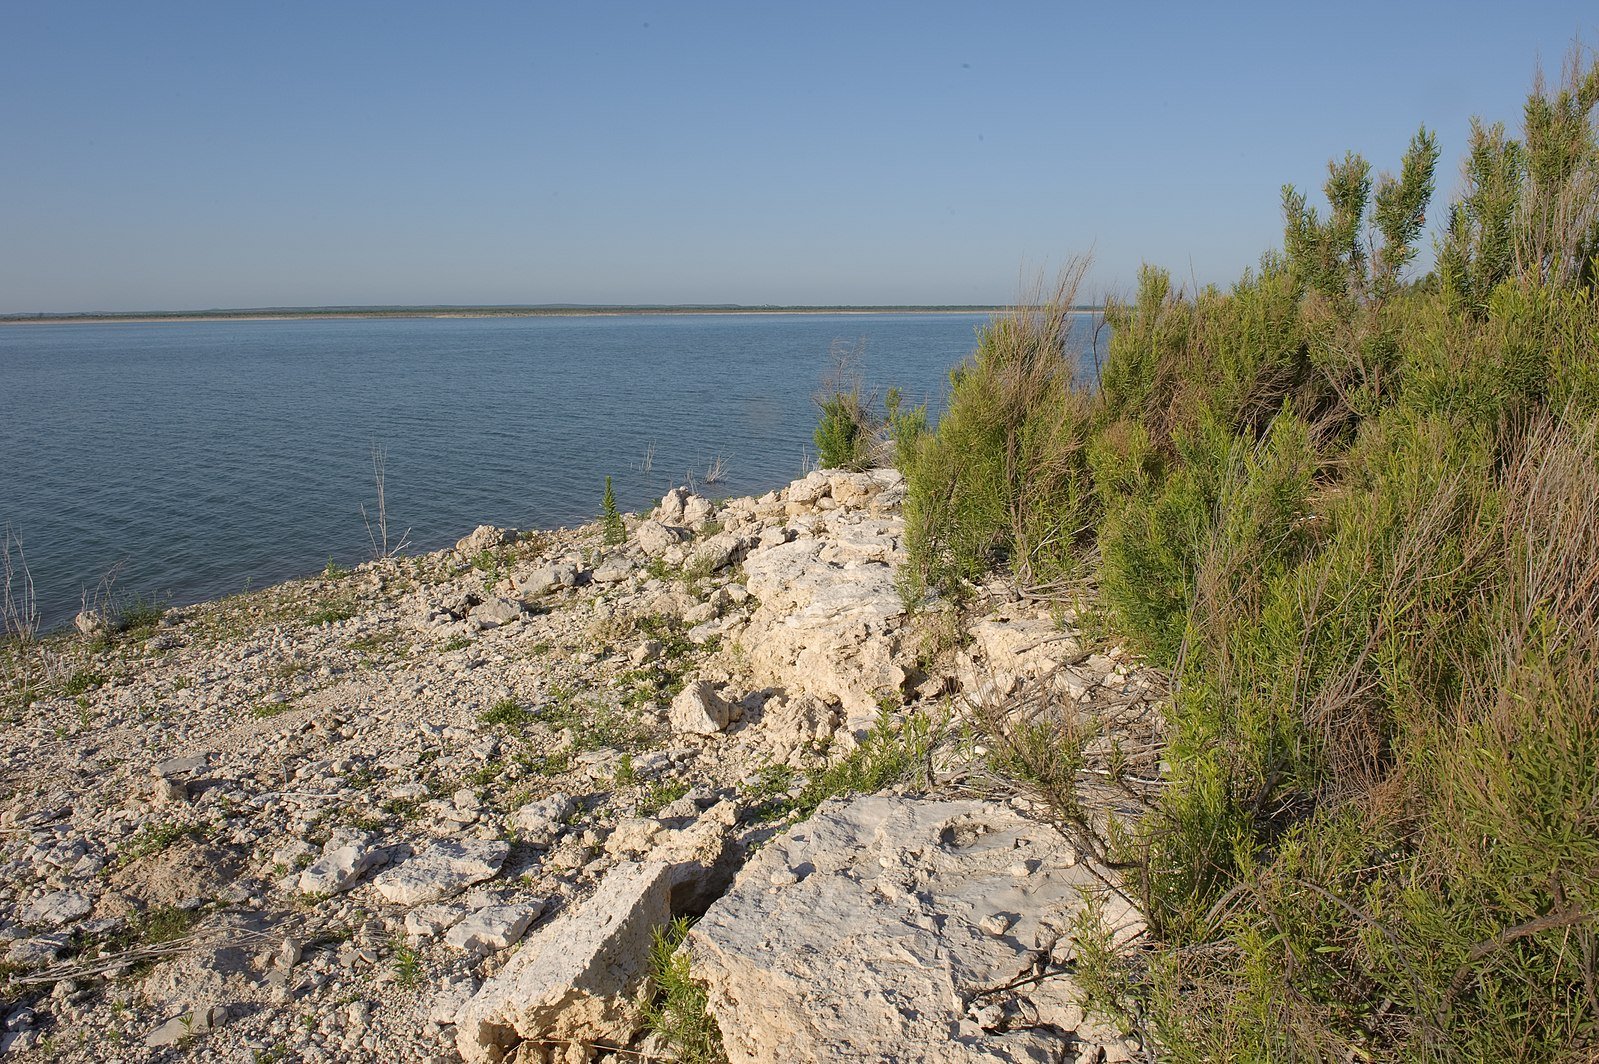 Twin Buttes Reservoir is fed by the Middle Concho and Spring/Dove Creek watershed region